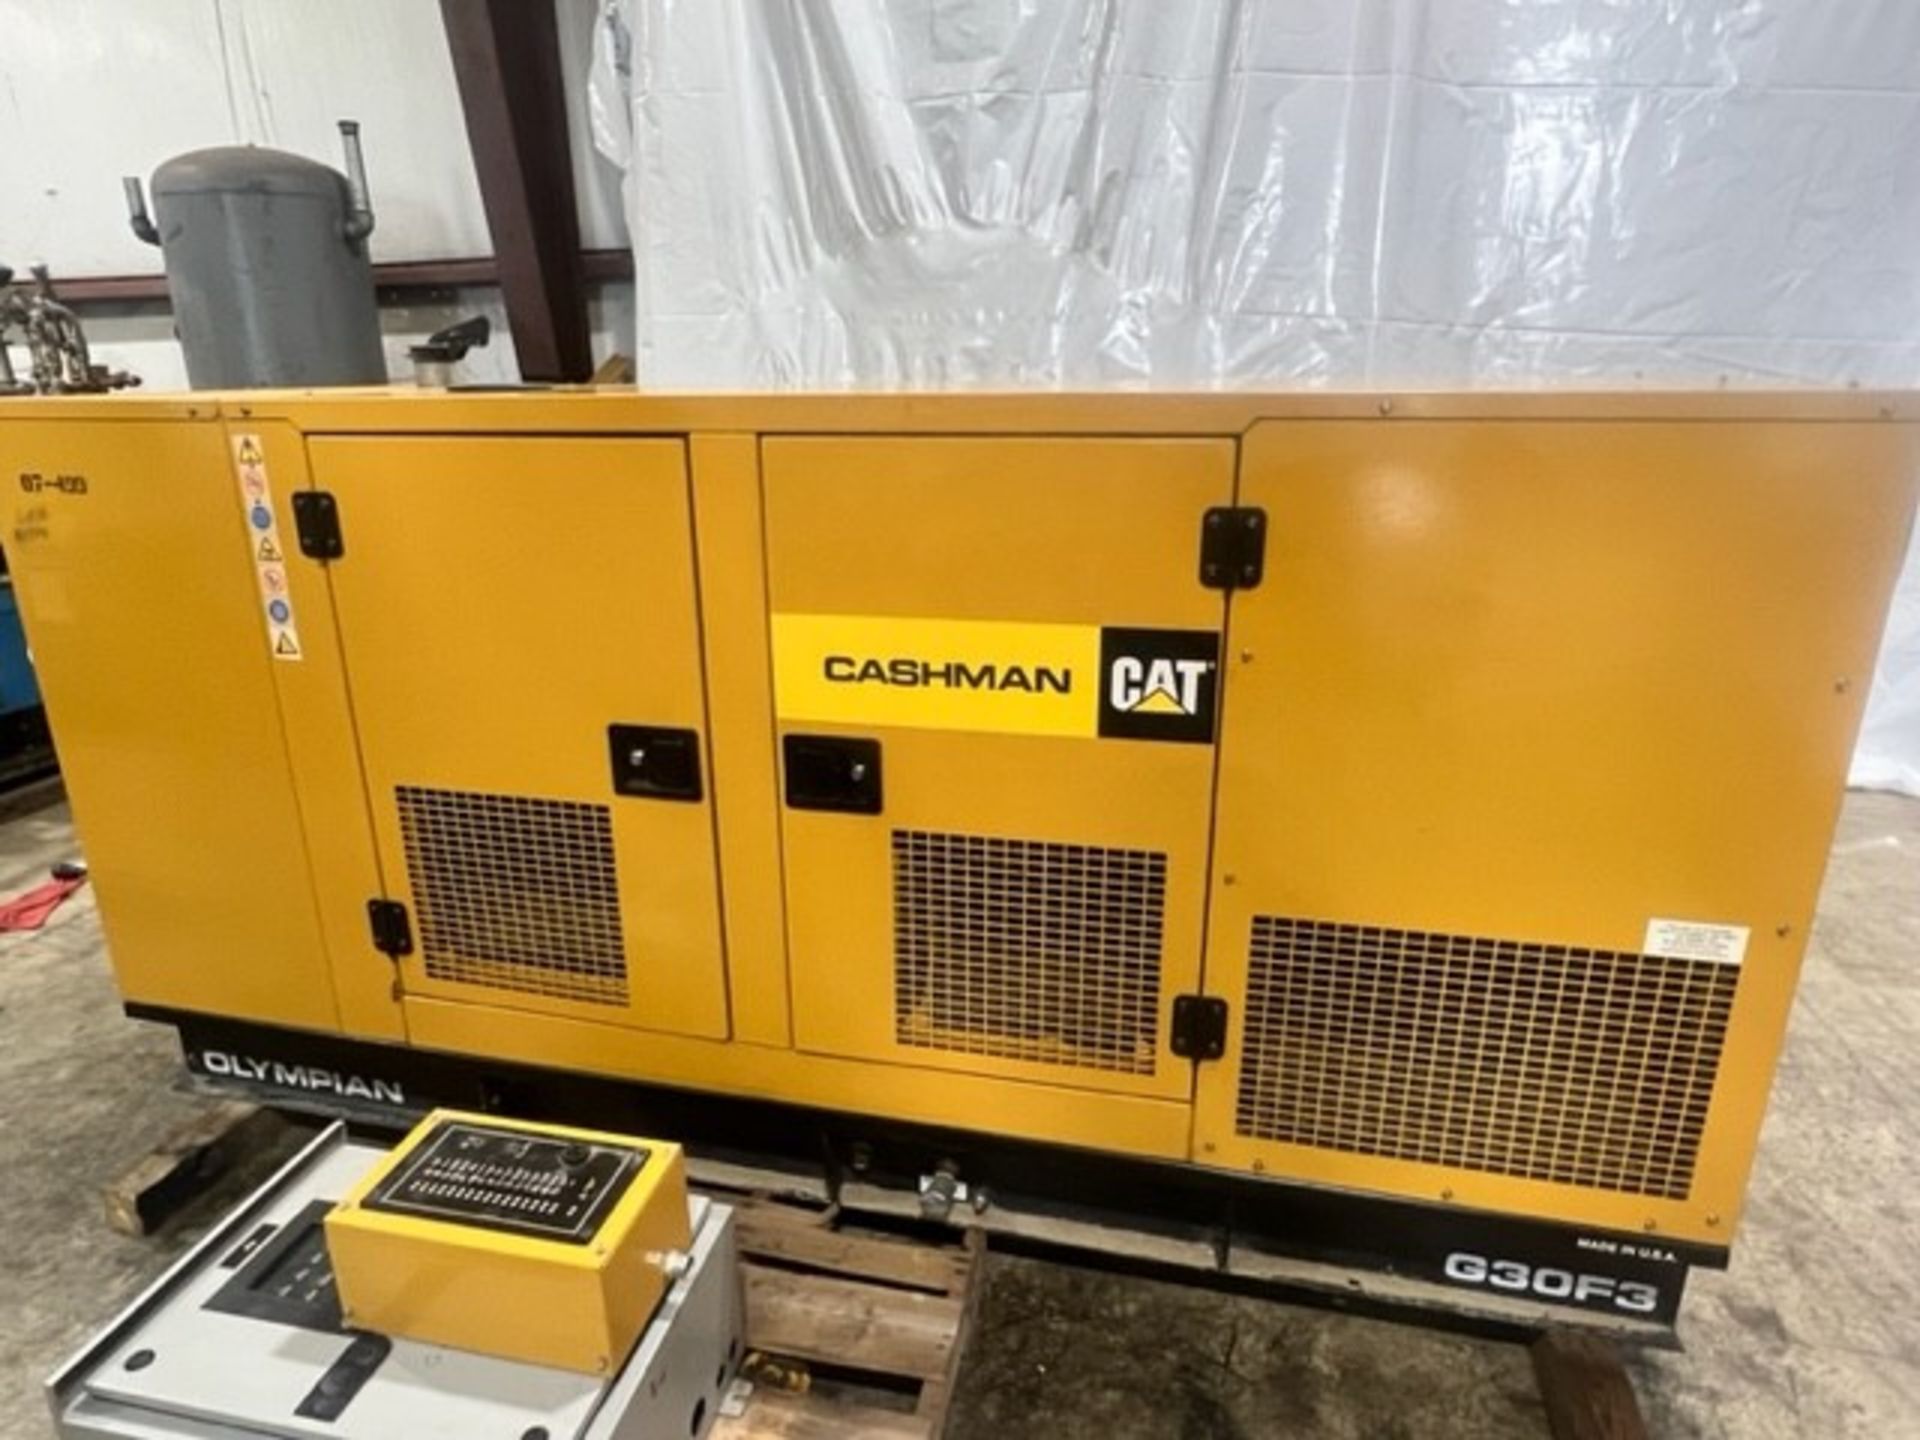 Olympia Natural Gas Operated Generator, Model G30F3, S/N OLY00000KNCO1173, Mfg. 2007, Model of